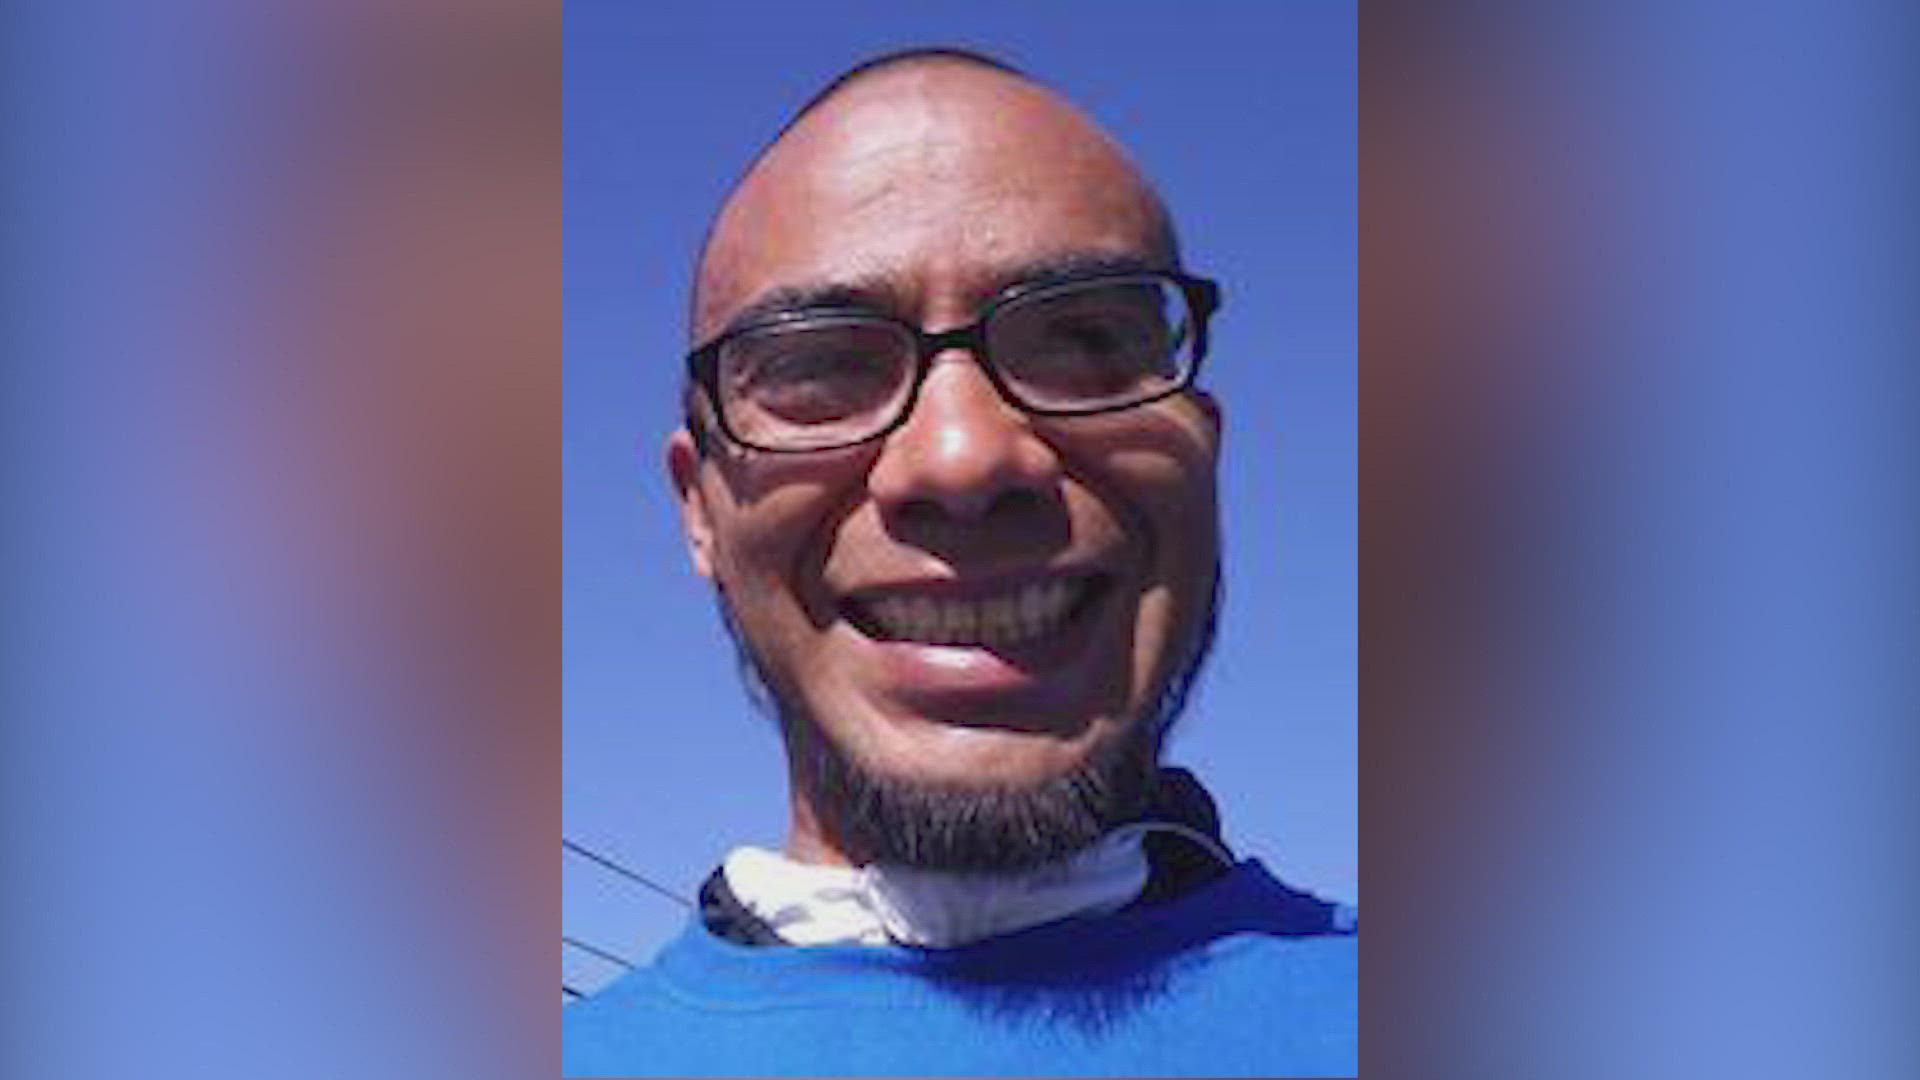 Angelo Polendo, 37, was shot and killed on October 11, 2016.